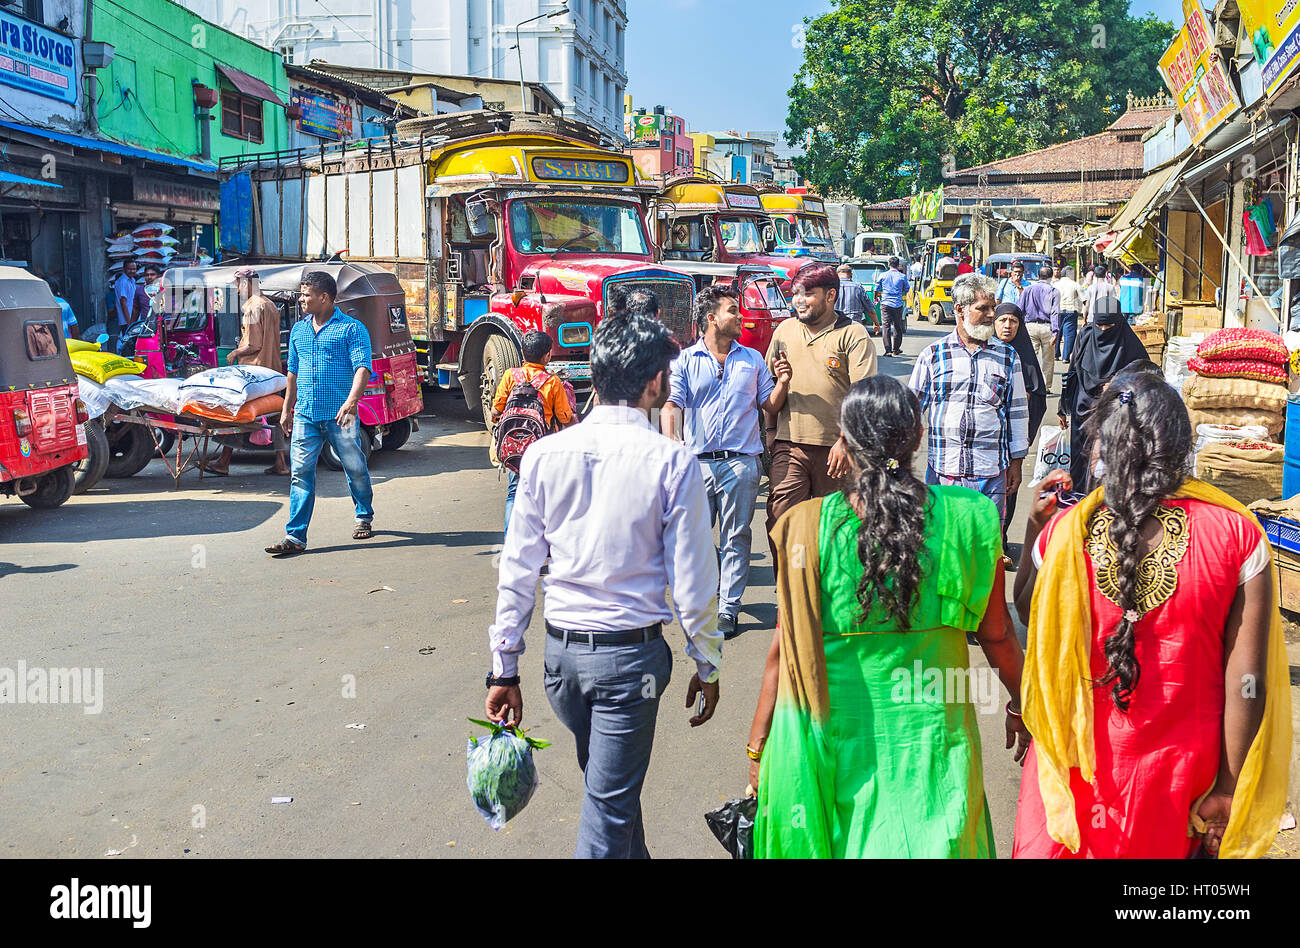 COLOMBO, SRI LANKA - DECEMBER 6, 2016: The crowded street in Pettah with colorful trucks, parked along the shops, on December 6 in Colombo. Stock Photo